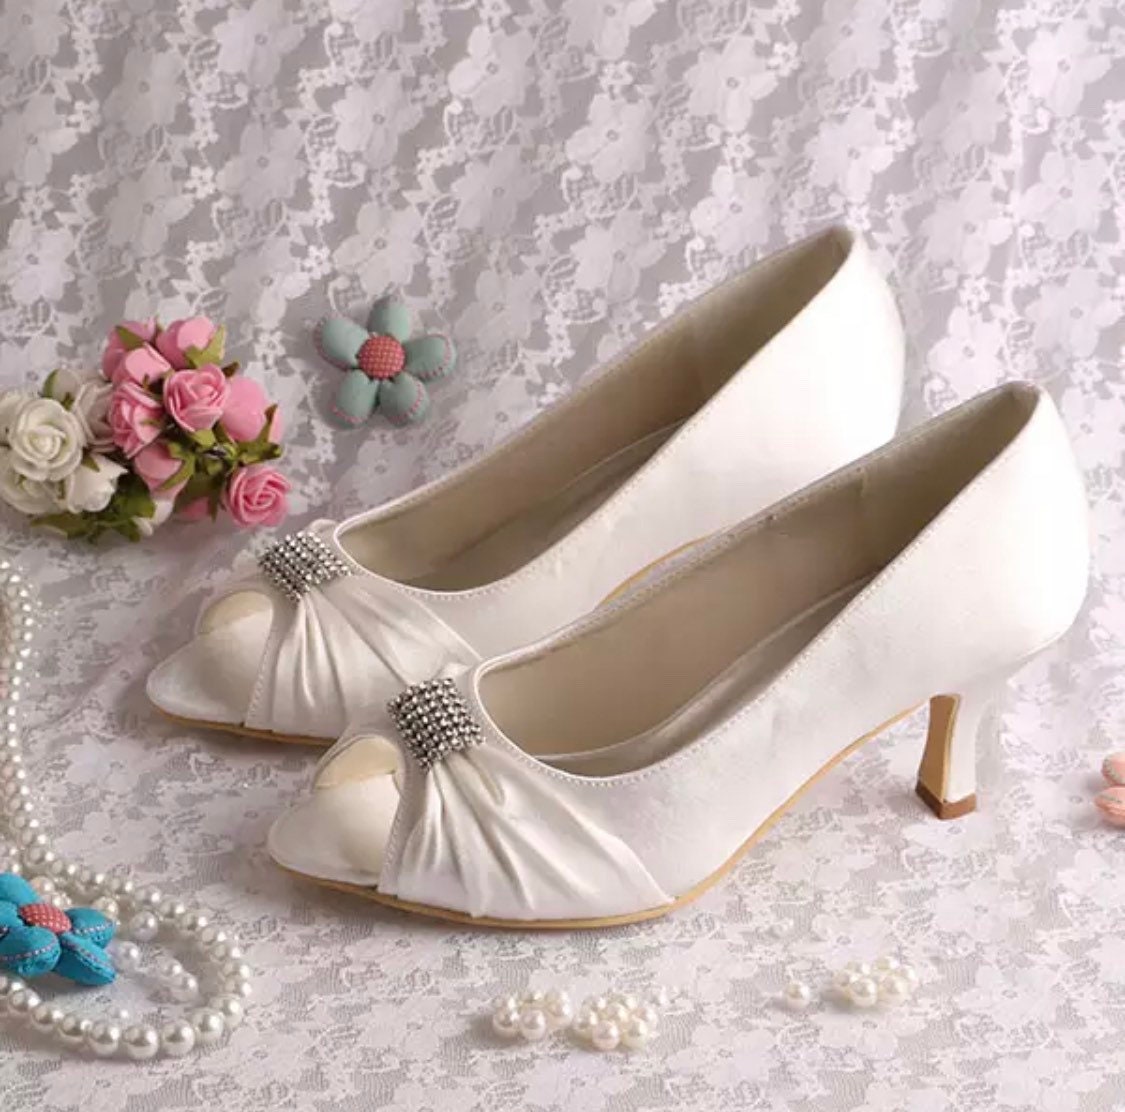 Handmade Comfortable Bridal Shoes Satin with Soft Leather | Etsy